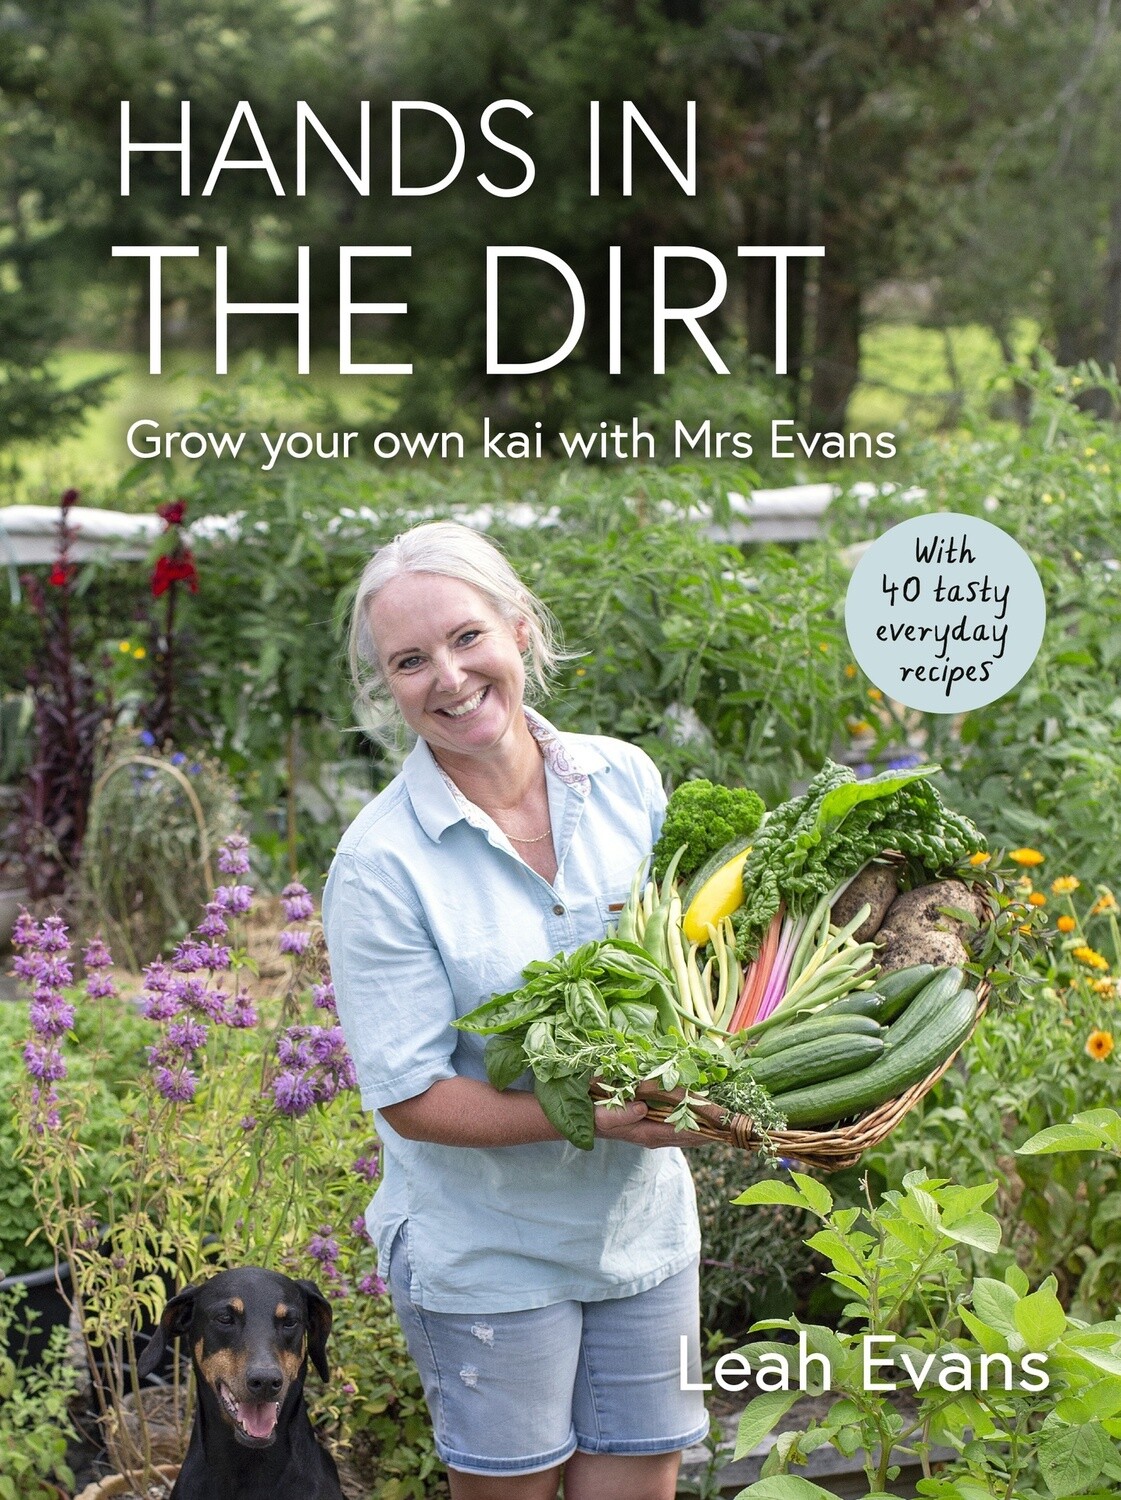 Hands in the Dirt: Grow your own kai with Mrs Evans by Leah Evans